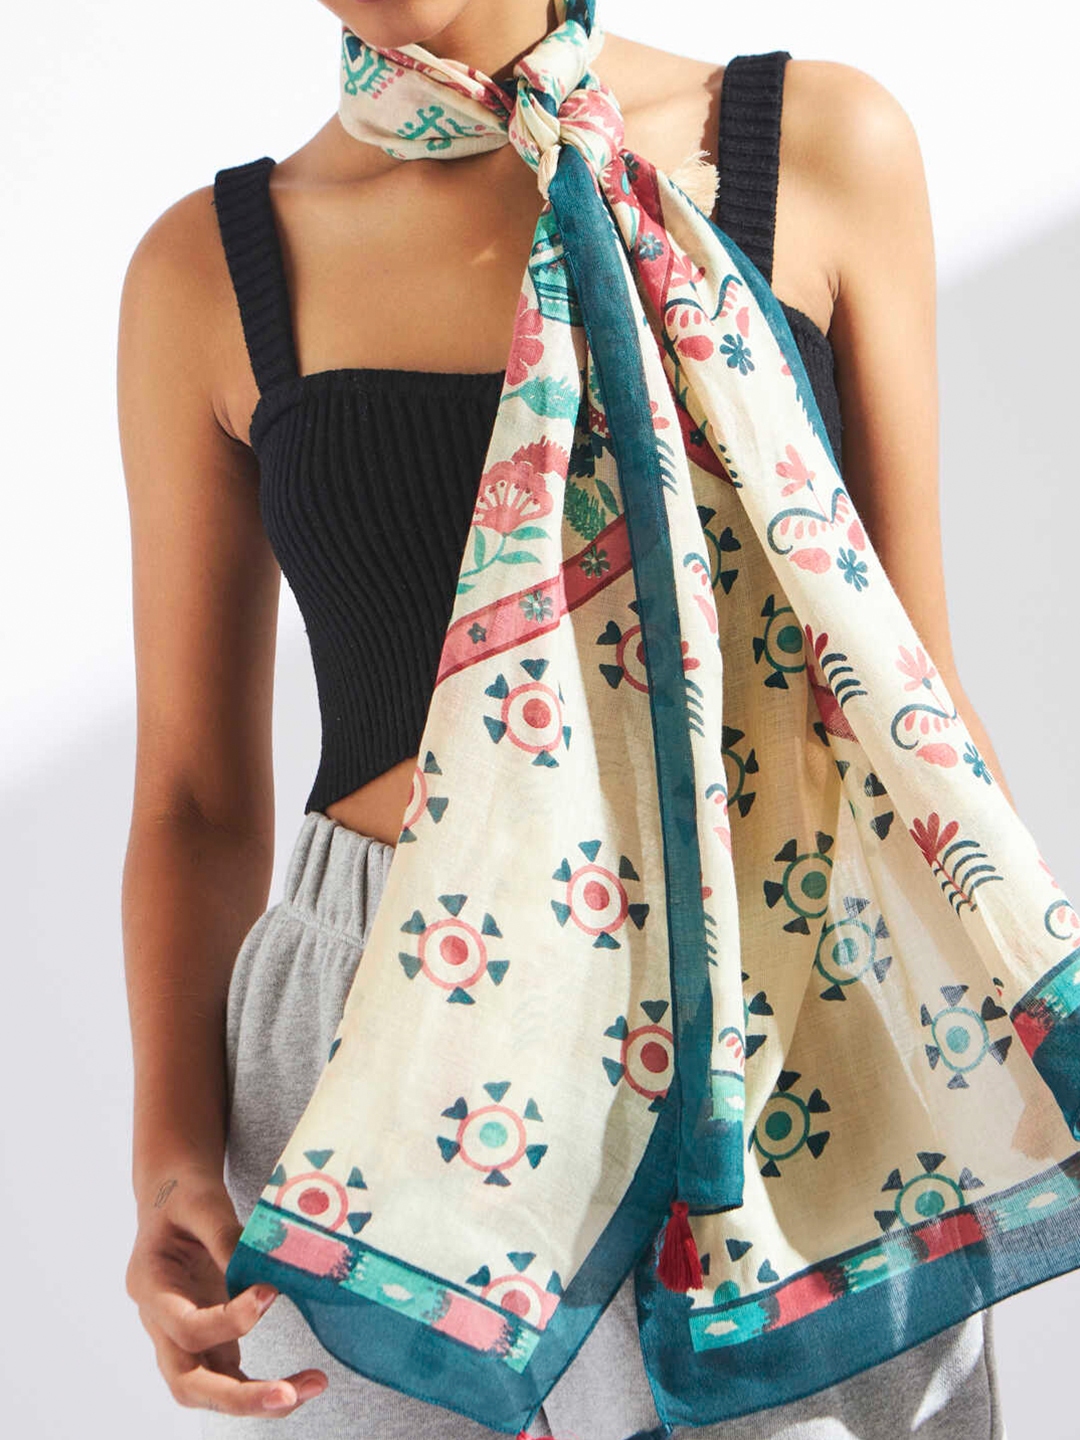 Top Websites for Buying Scarves